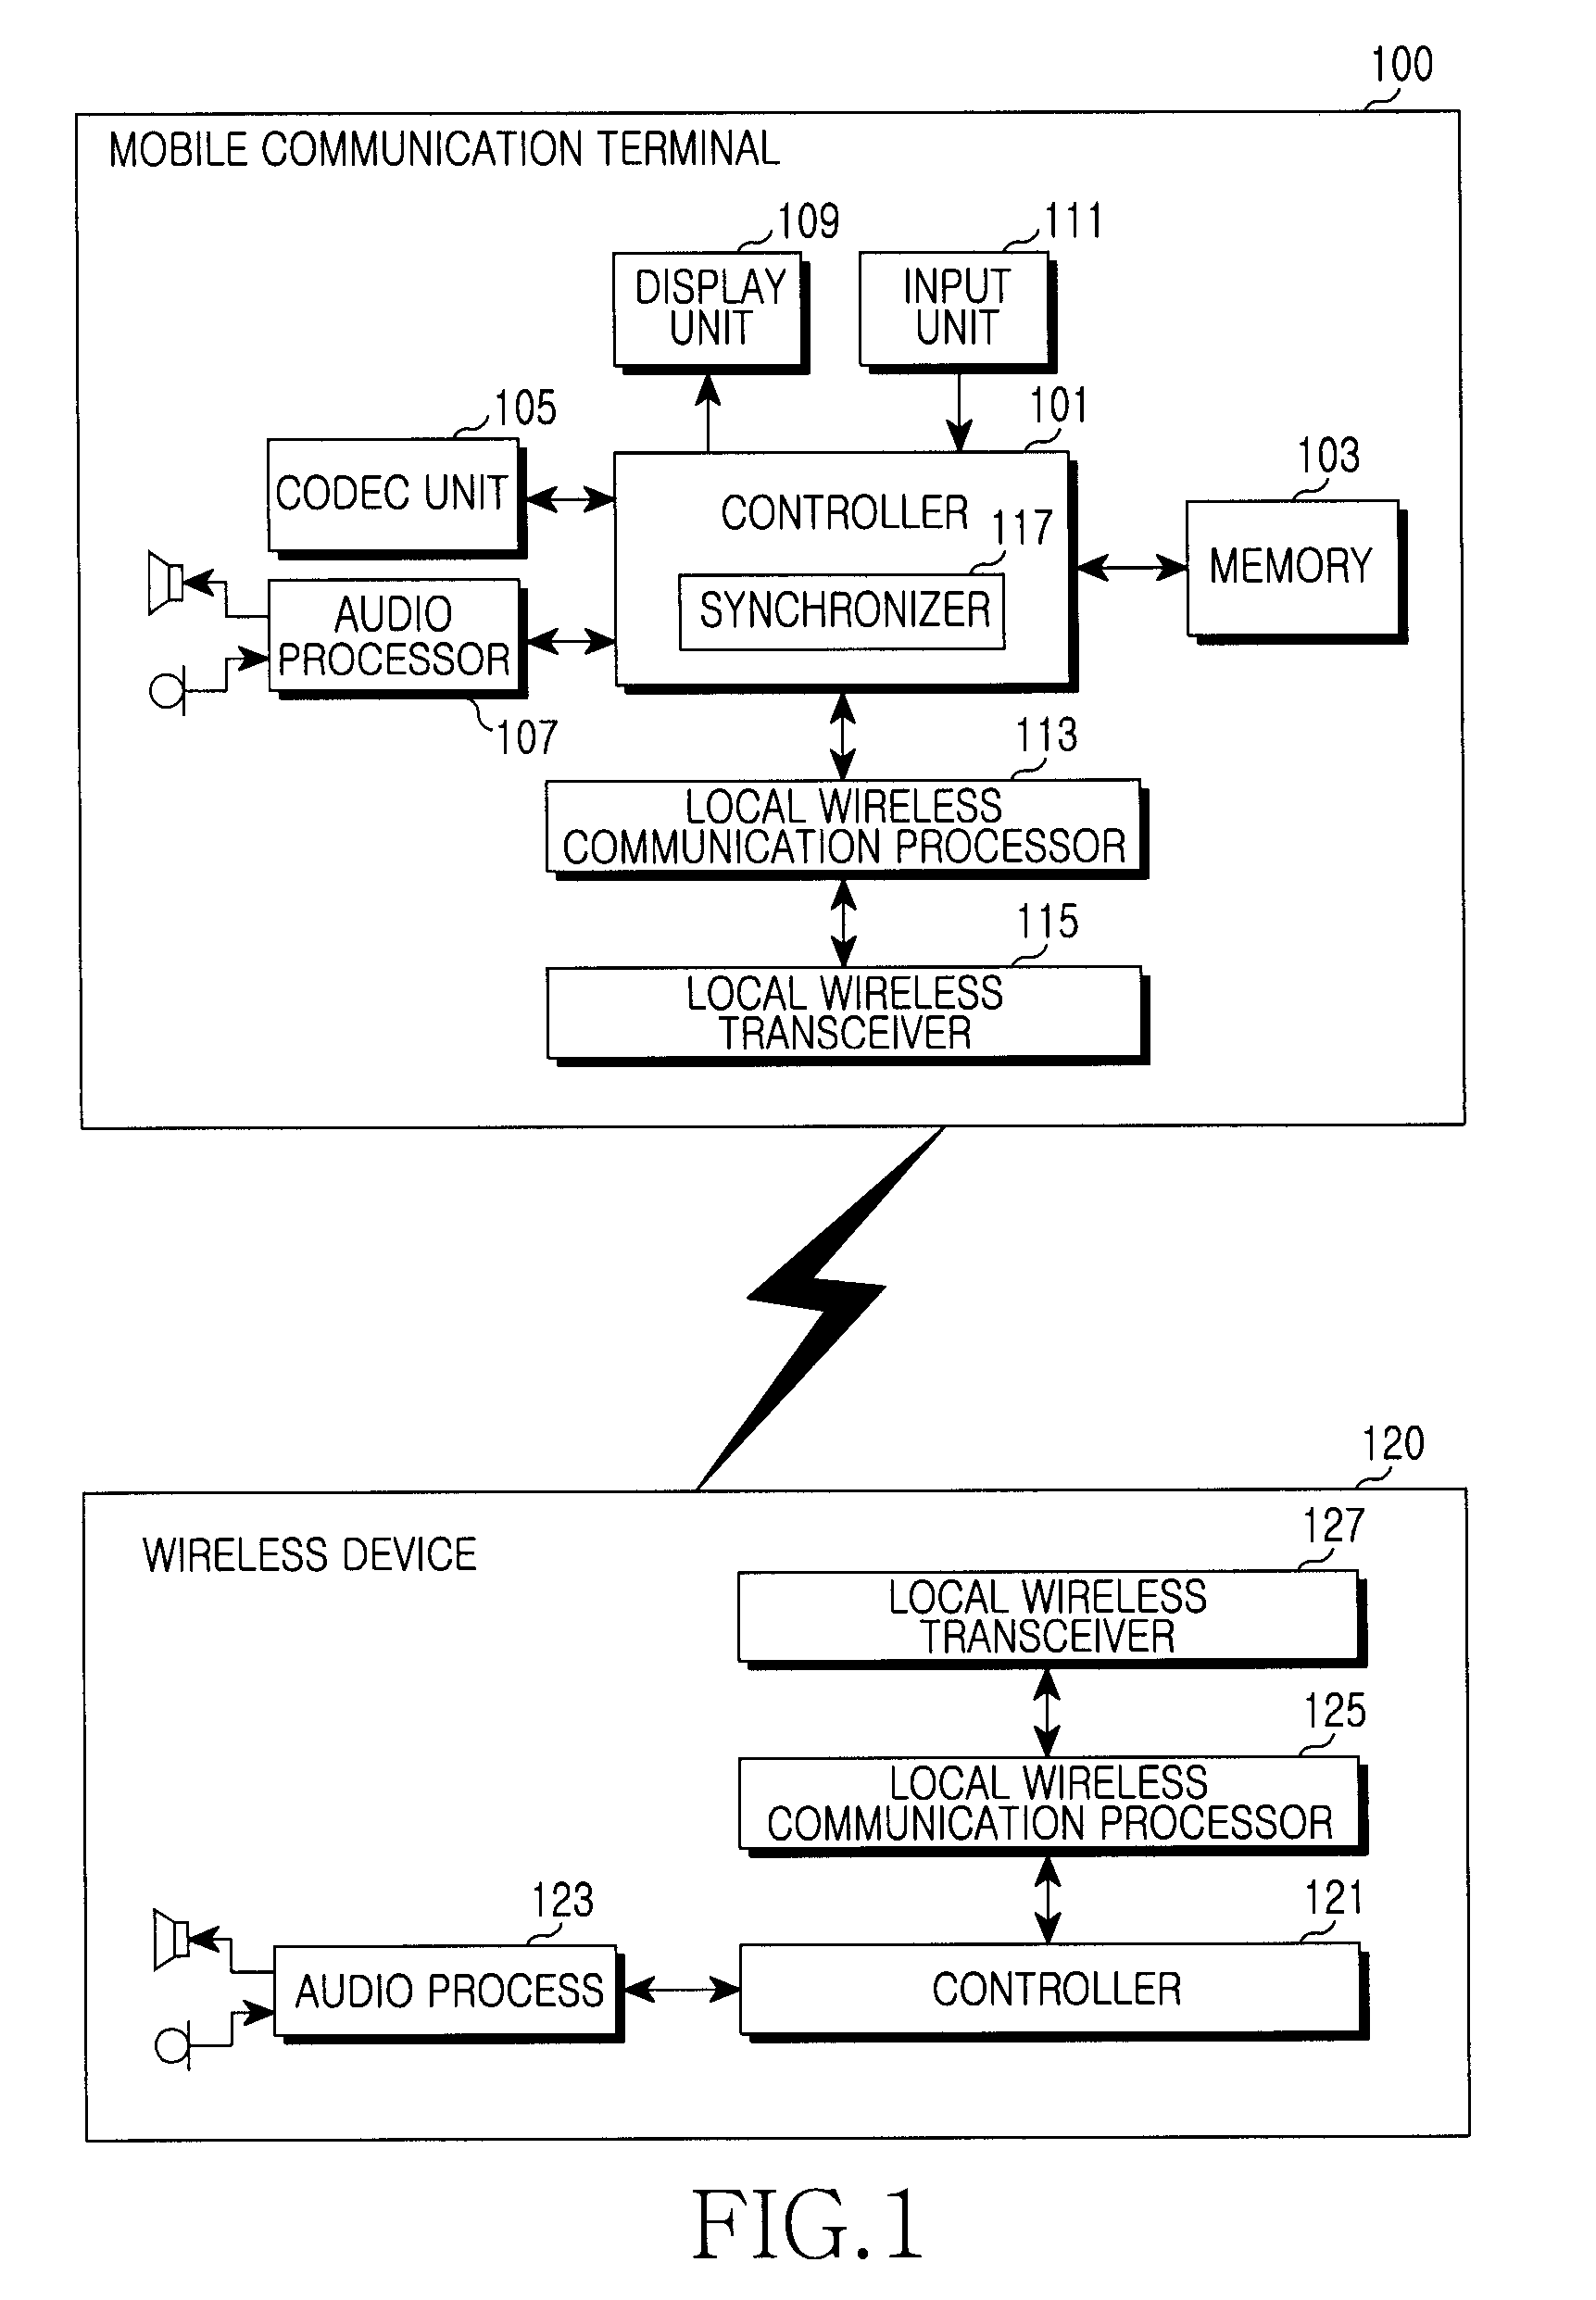 Apparatus and method for synchronization between video and audio in mobile communication terminal